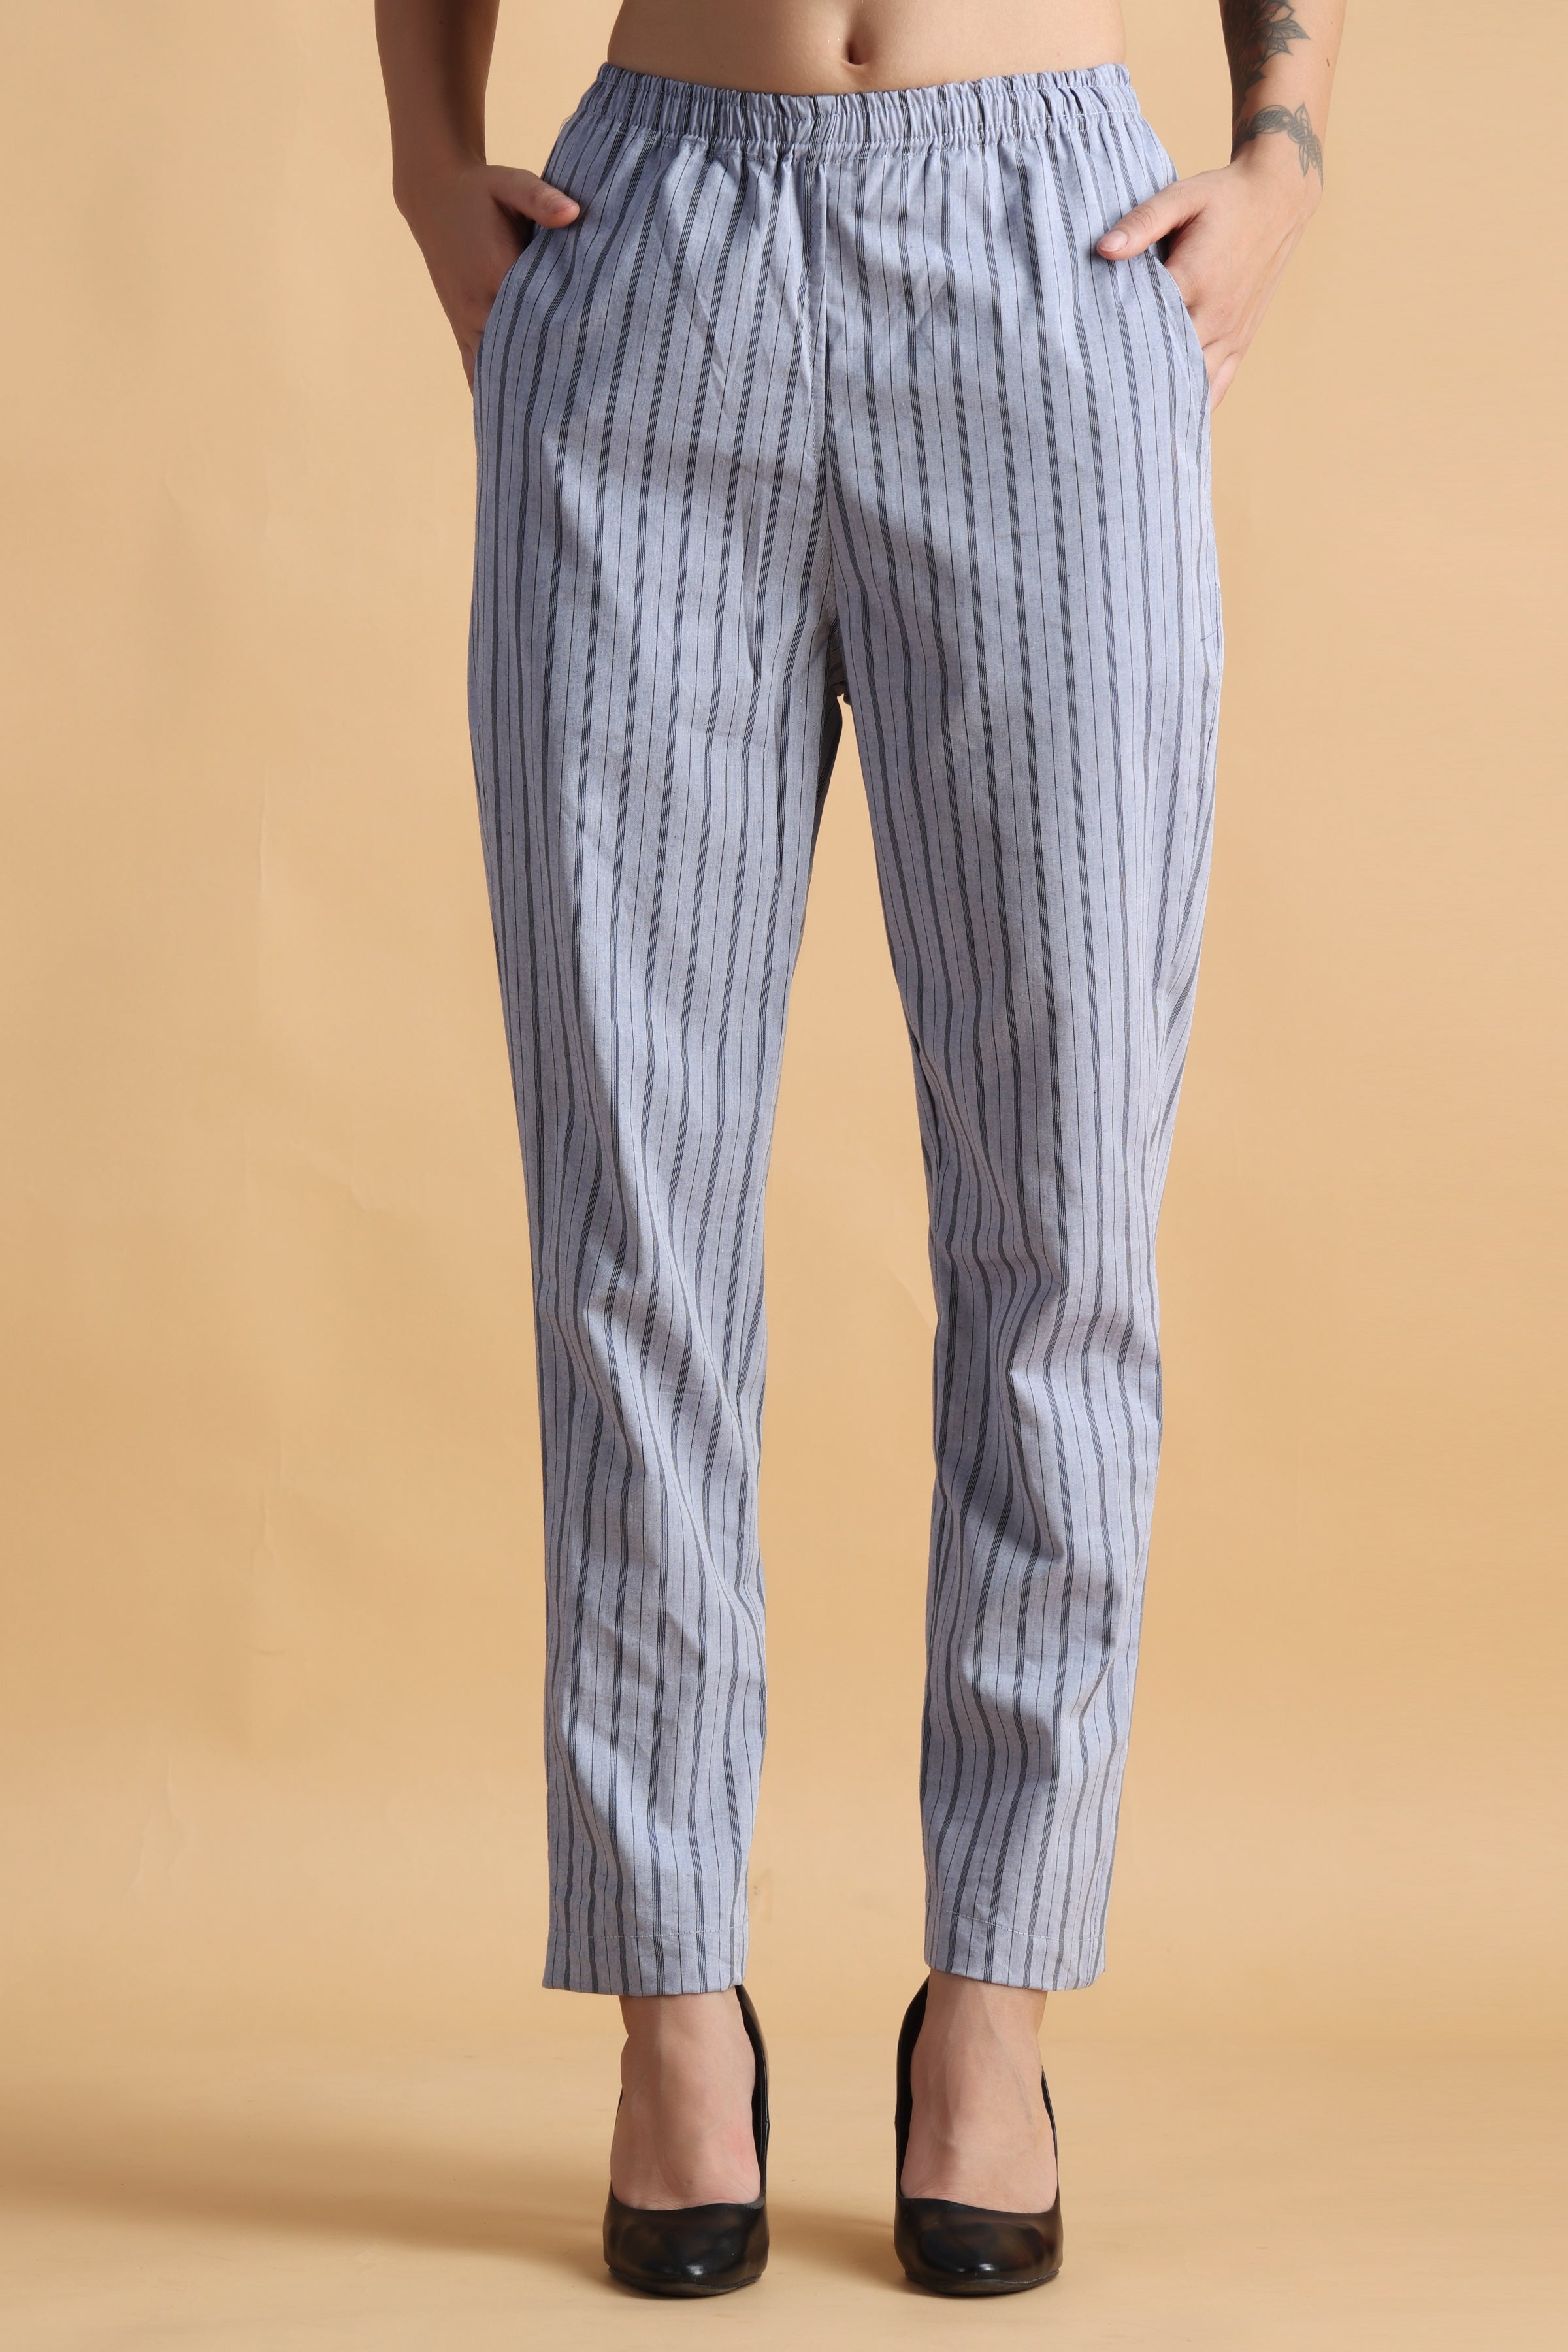 Buy Mr Bowerbird Men Navy Blue  White Tapered Fit Striped Regular Trousers   Trousers for Men 9929101  Myntra